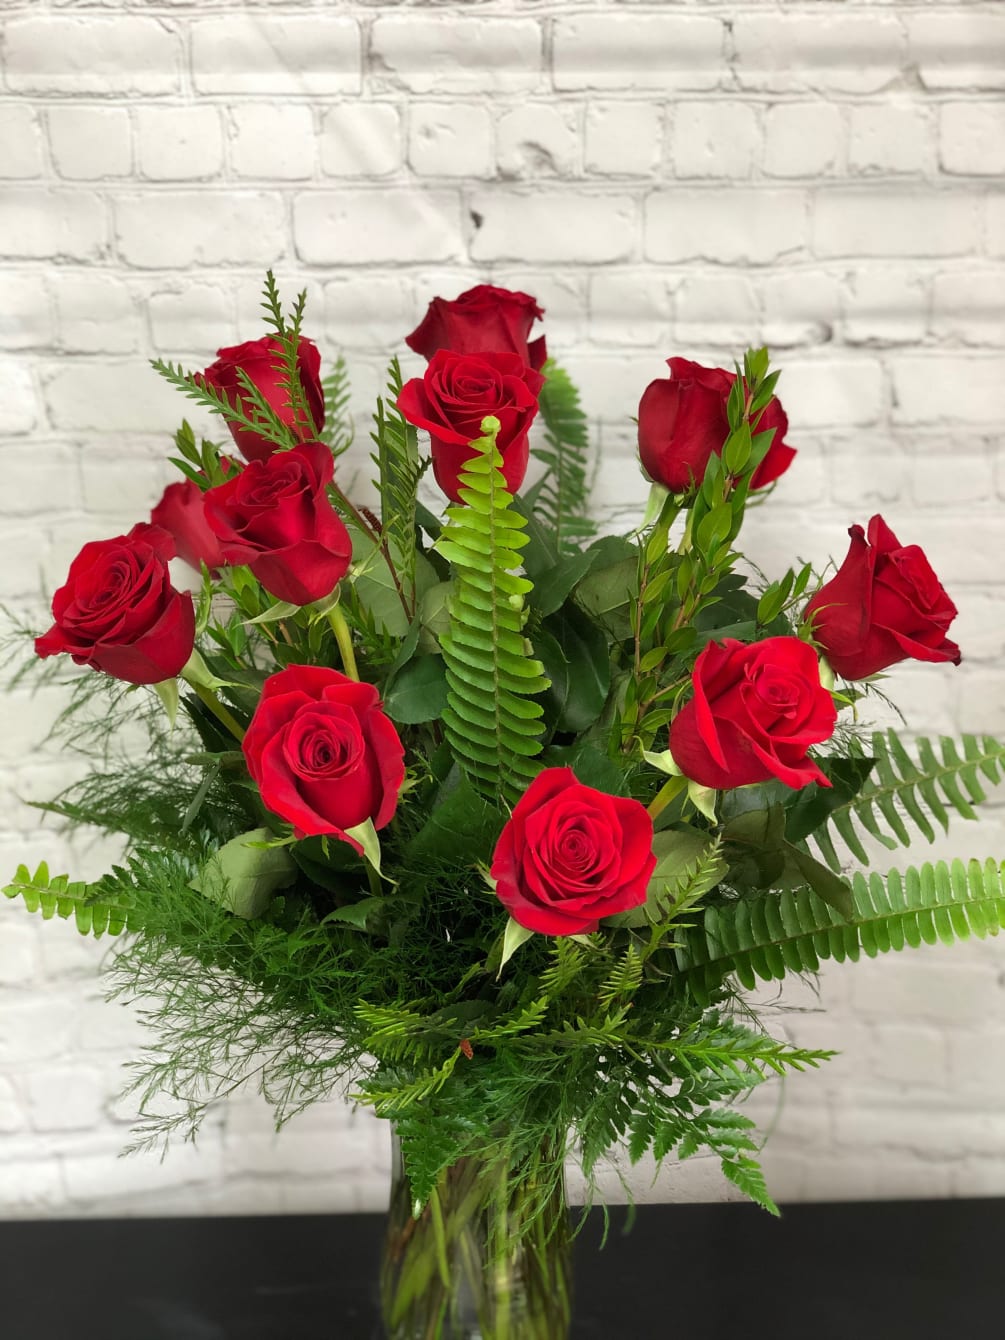 Long Stem Rosa Prima Bouquet is a classic expression of love and